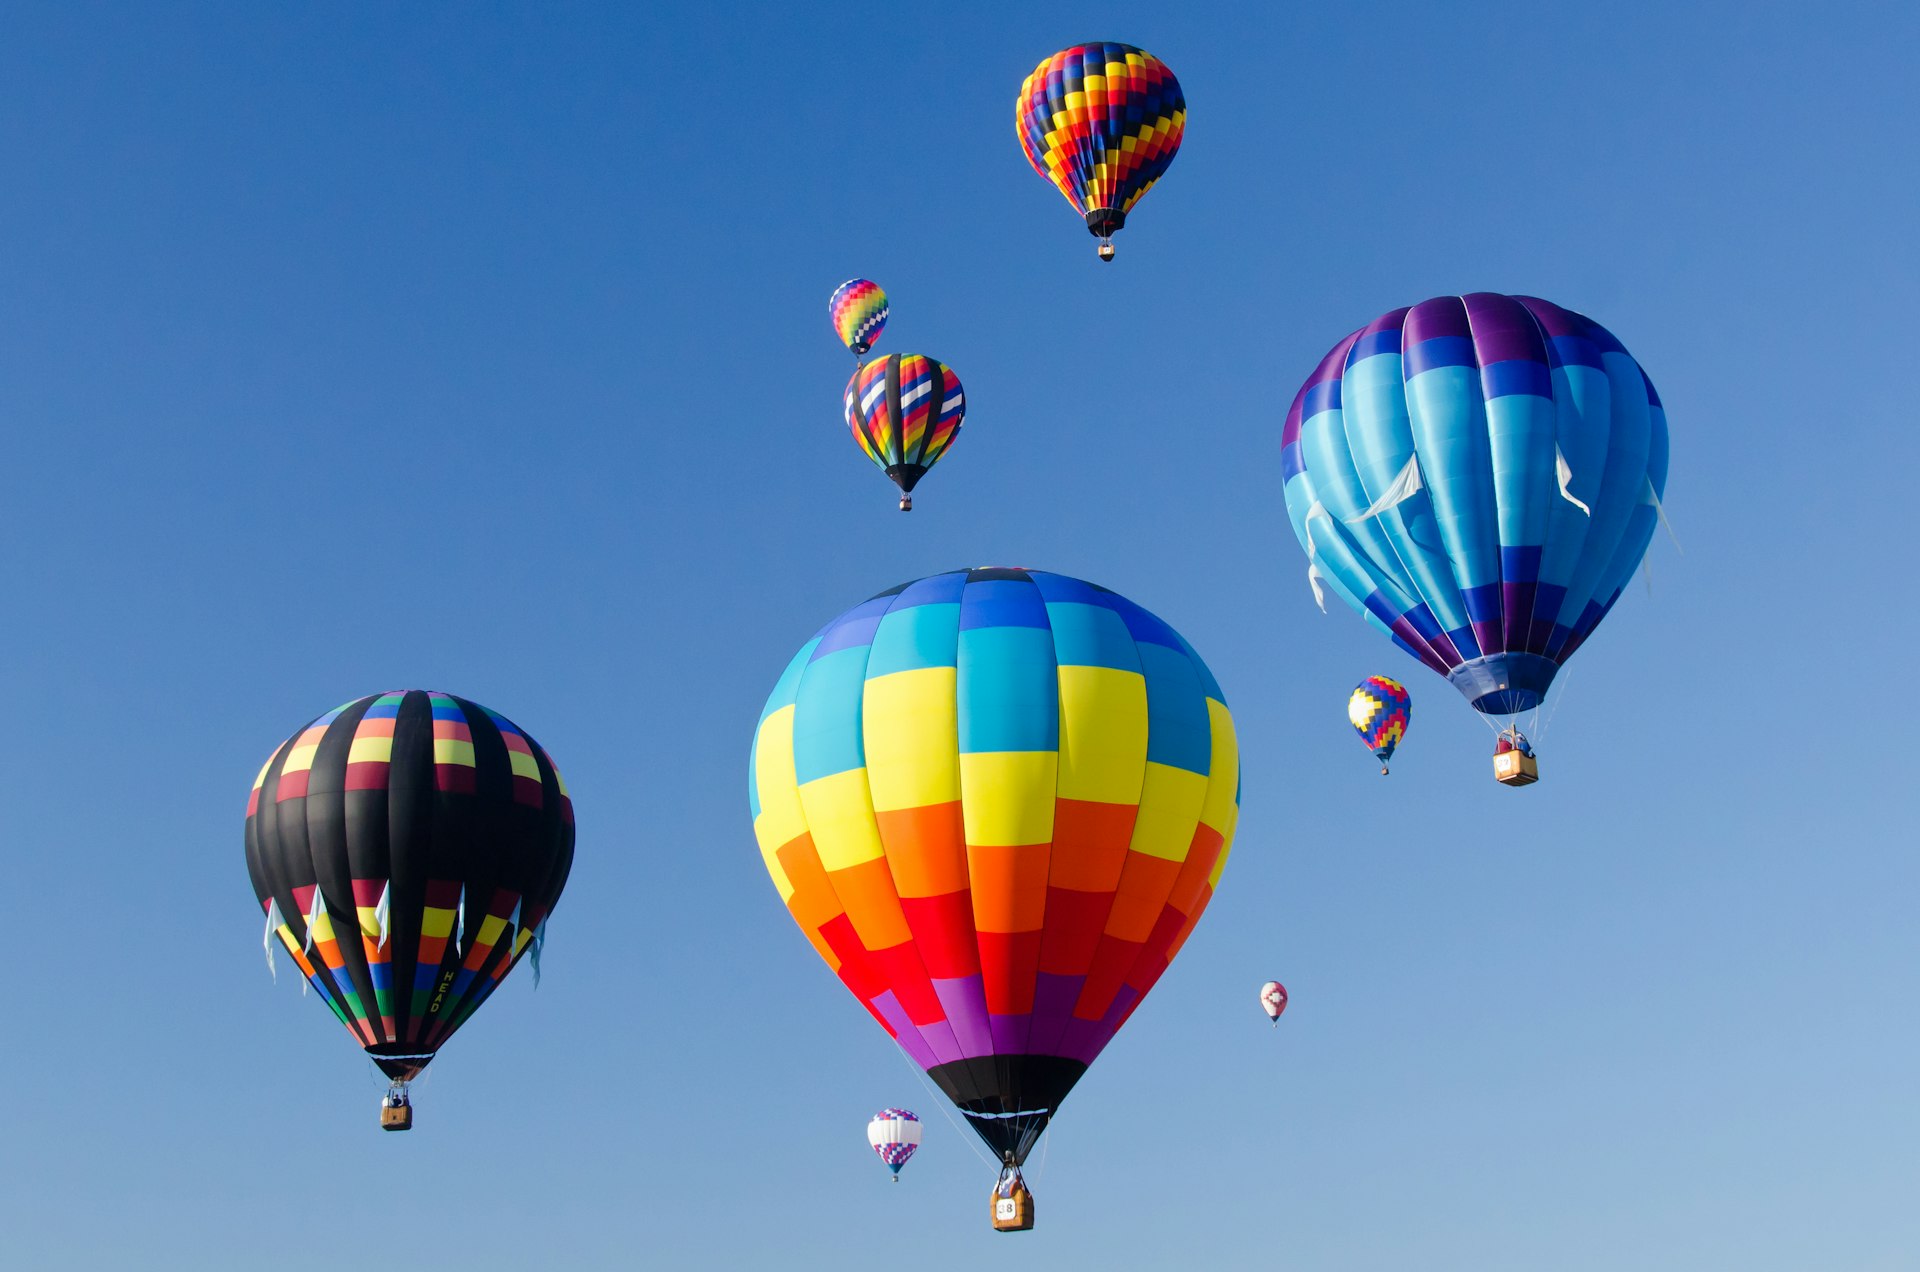 Colorful mass of hot air balloons in the air in South Carolina